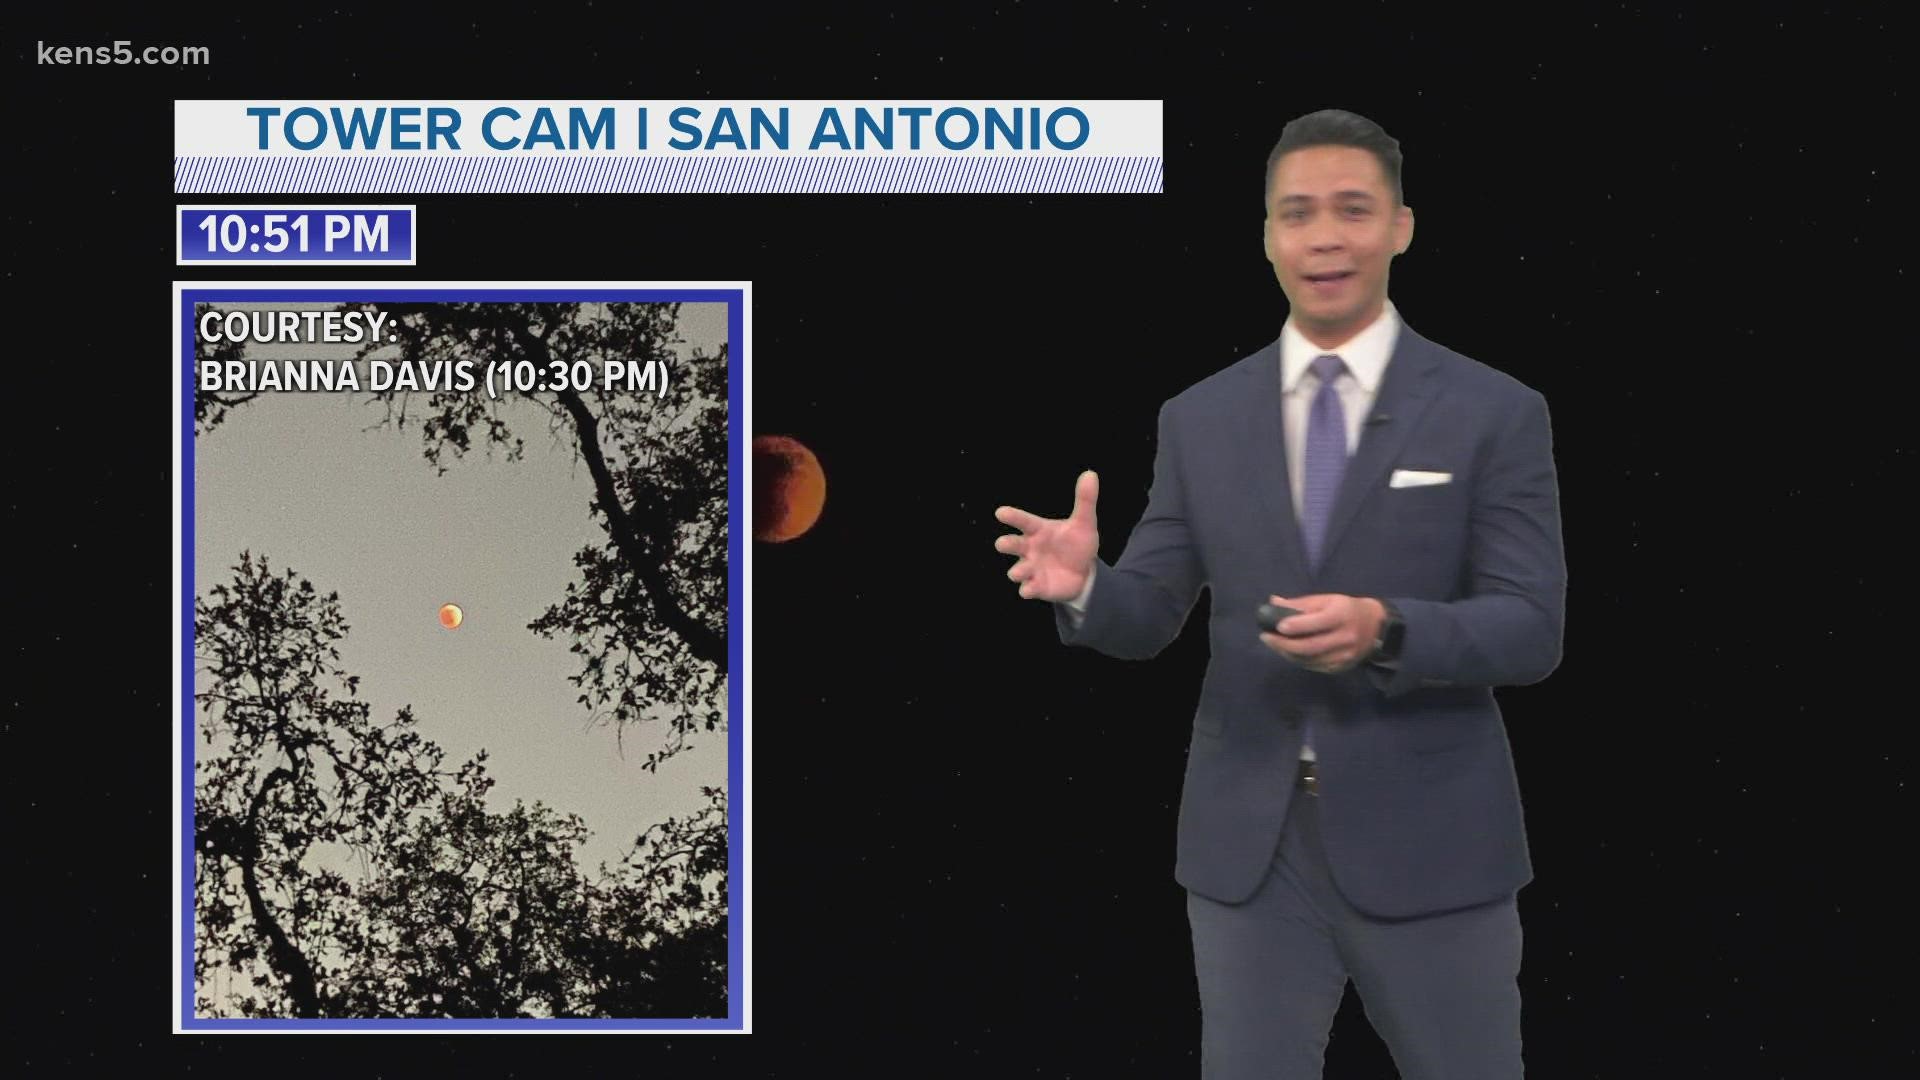 The moon turned dark red Sunday night, and viewers sent in pictures from across San Antonio.